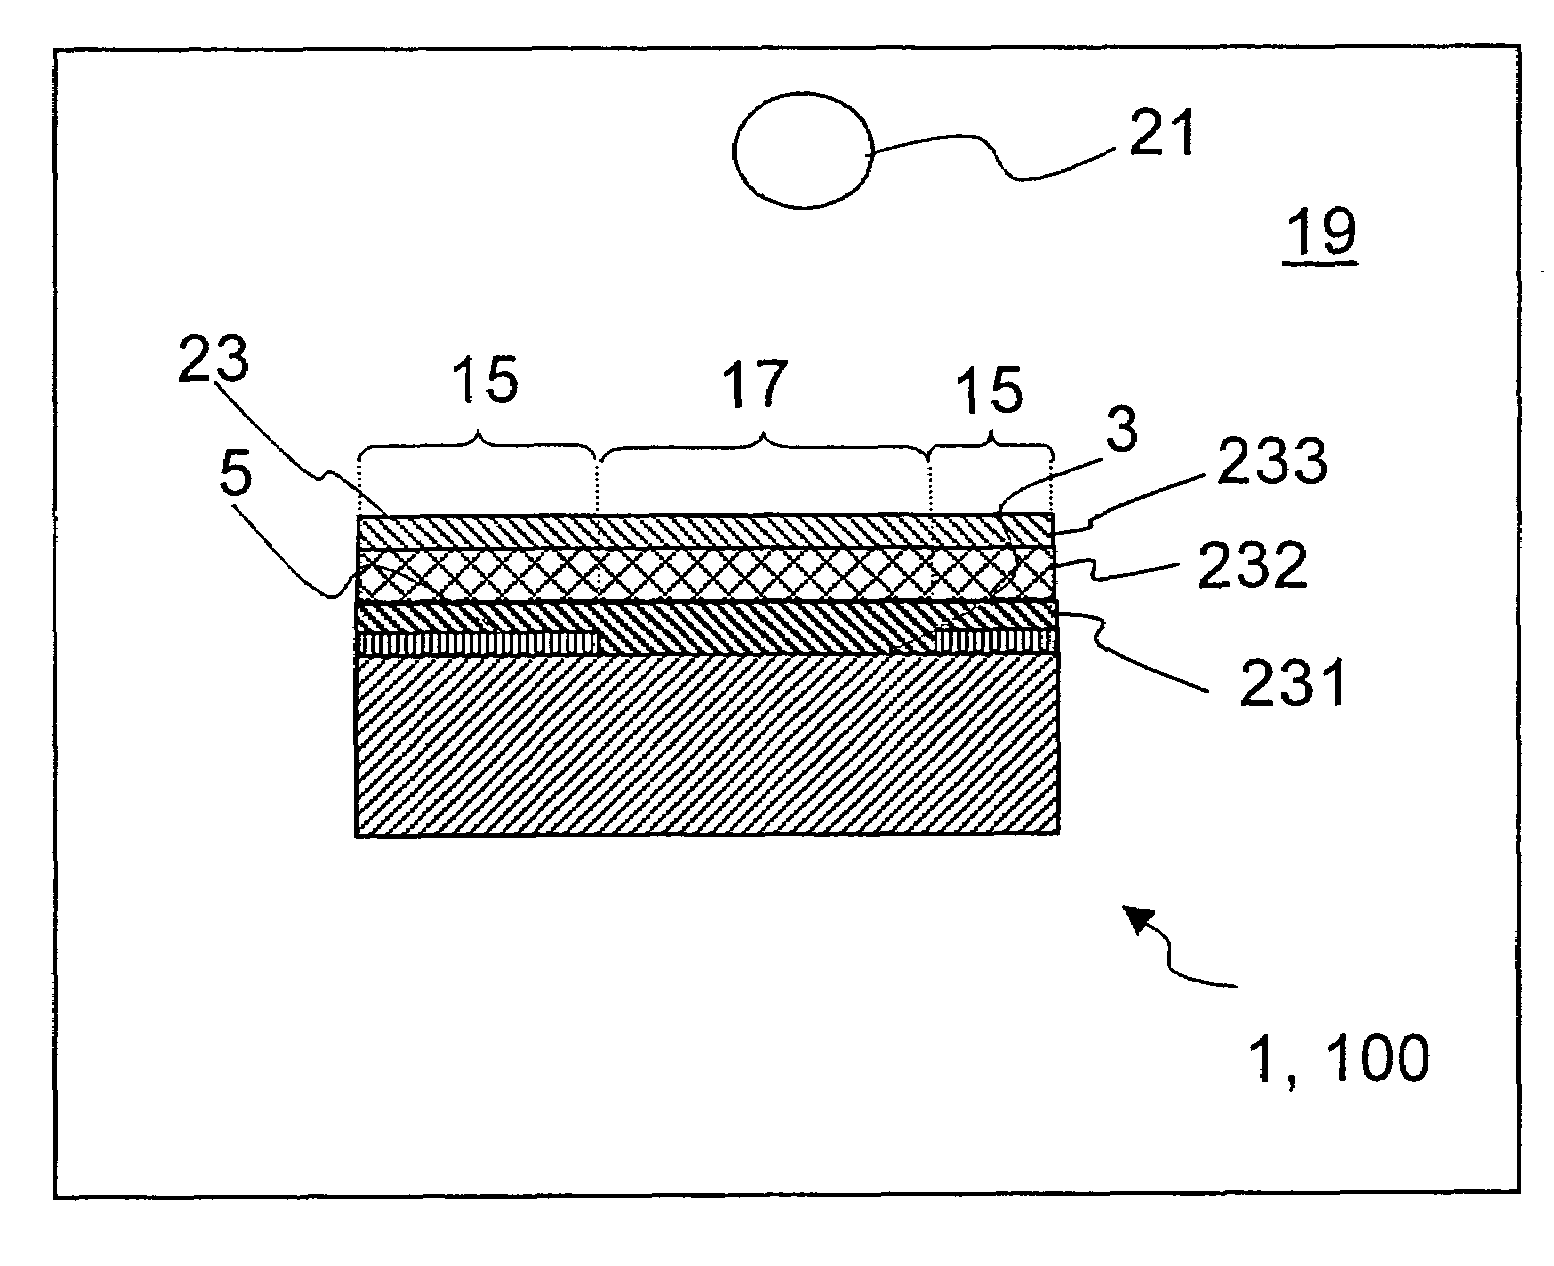 Process for producing patterned optical filter layers on substrates